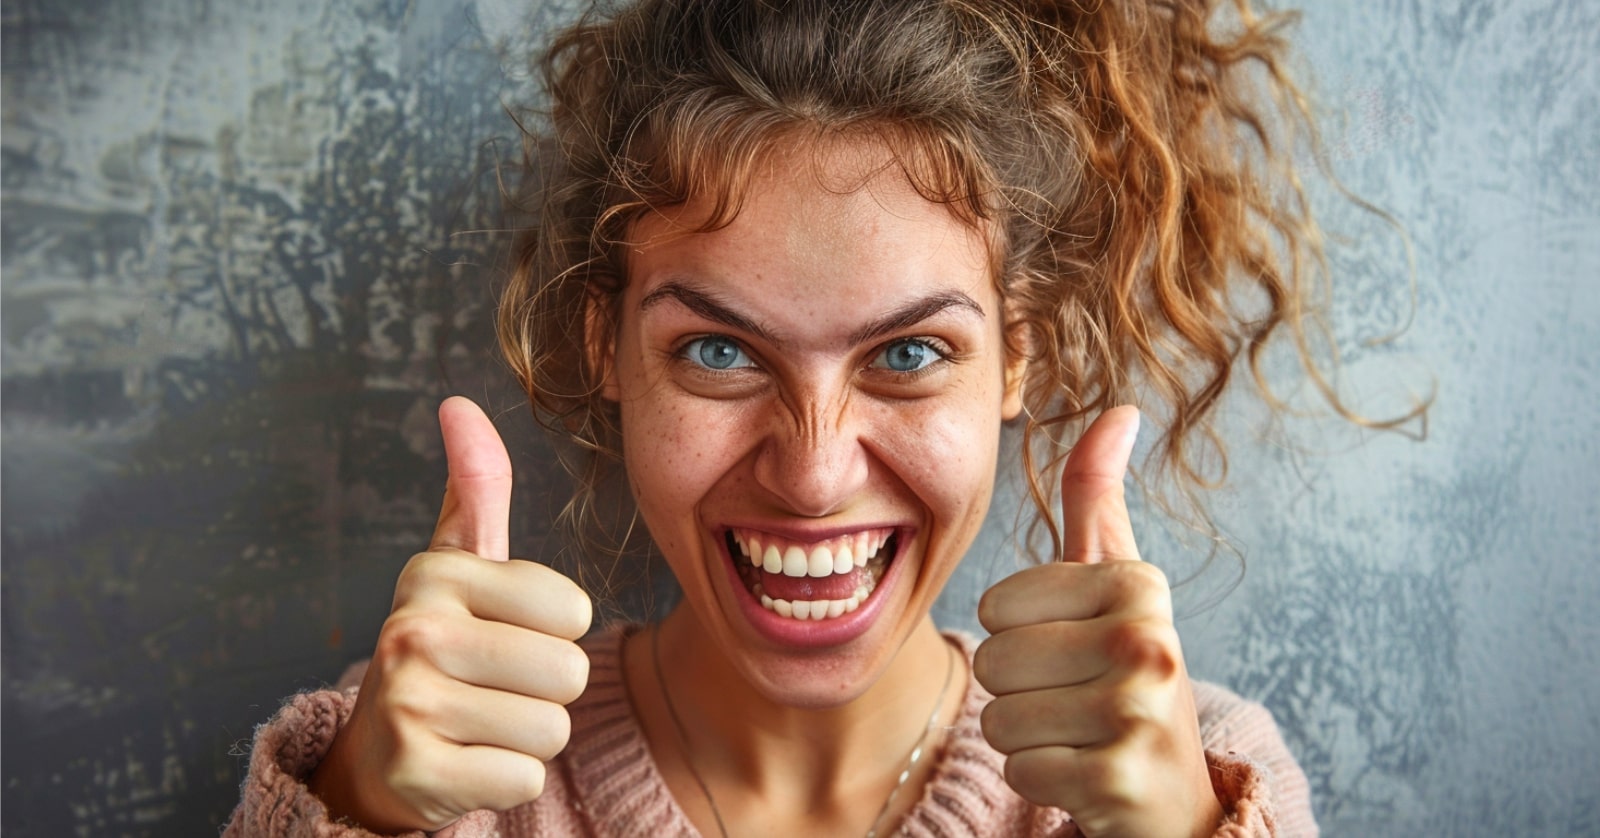 young woman giving two thumbs up with a crazy smile on her face against a grey background